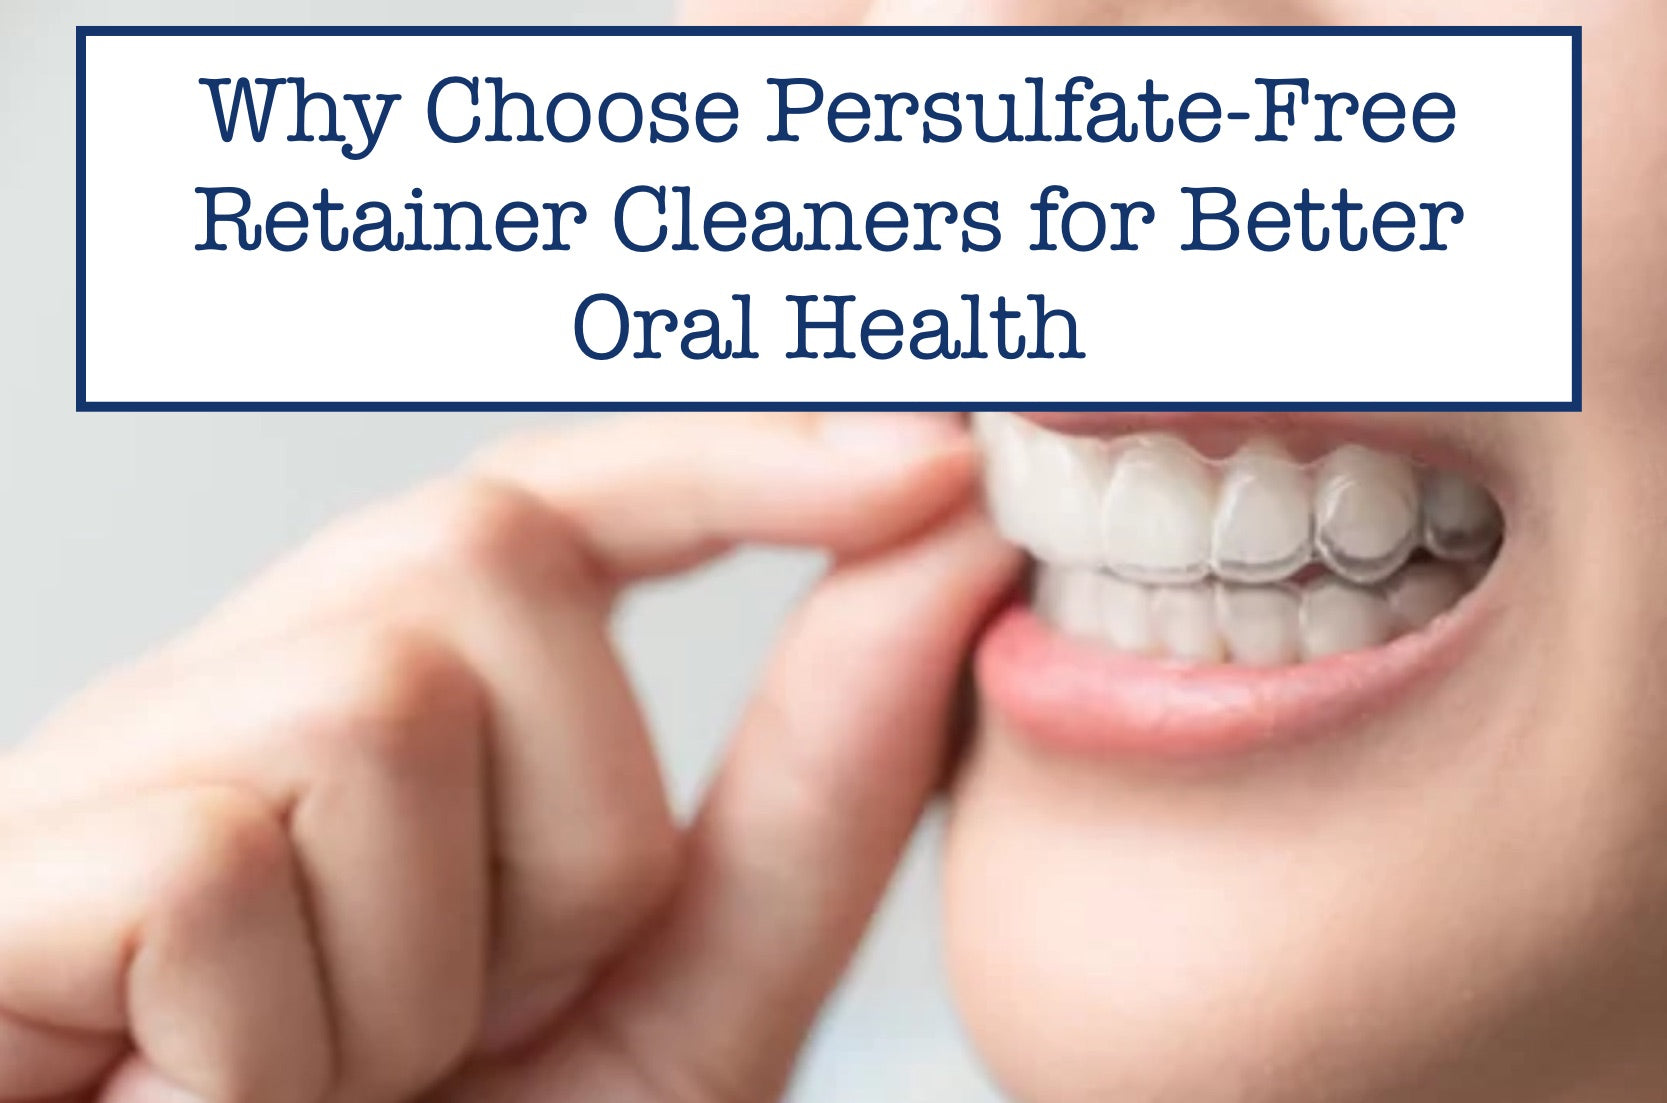 Why Choose Persulfate-Free Retainer Cleaners for Better Oral Health